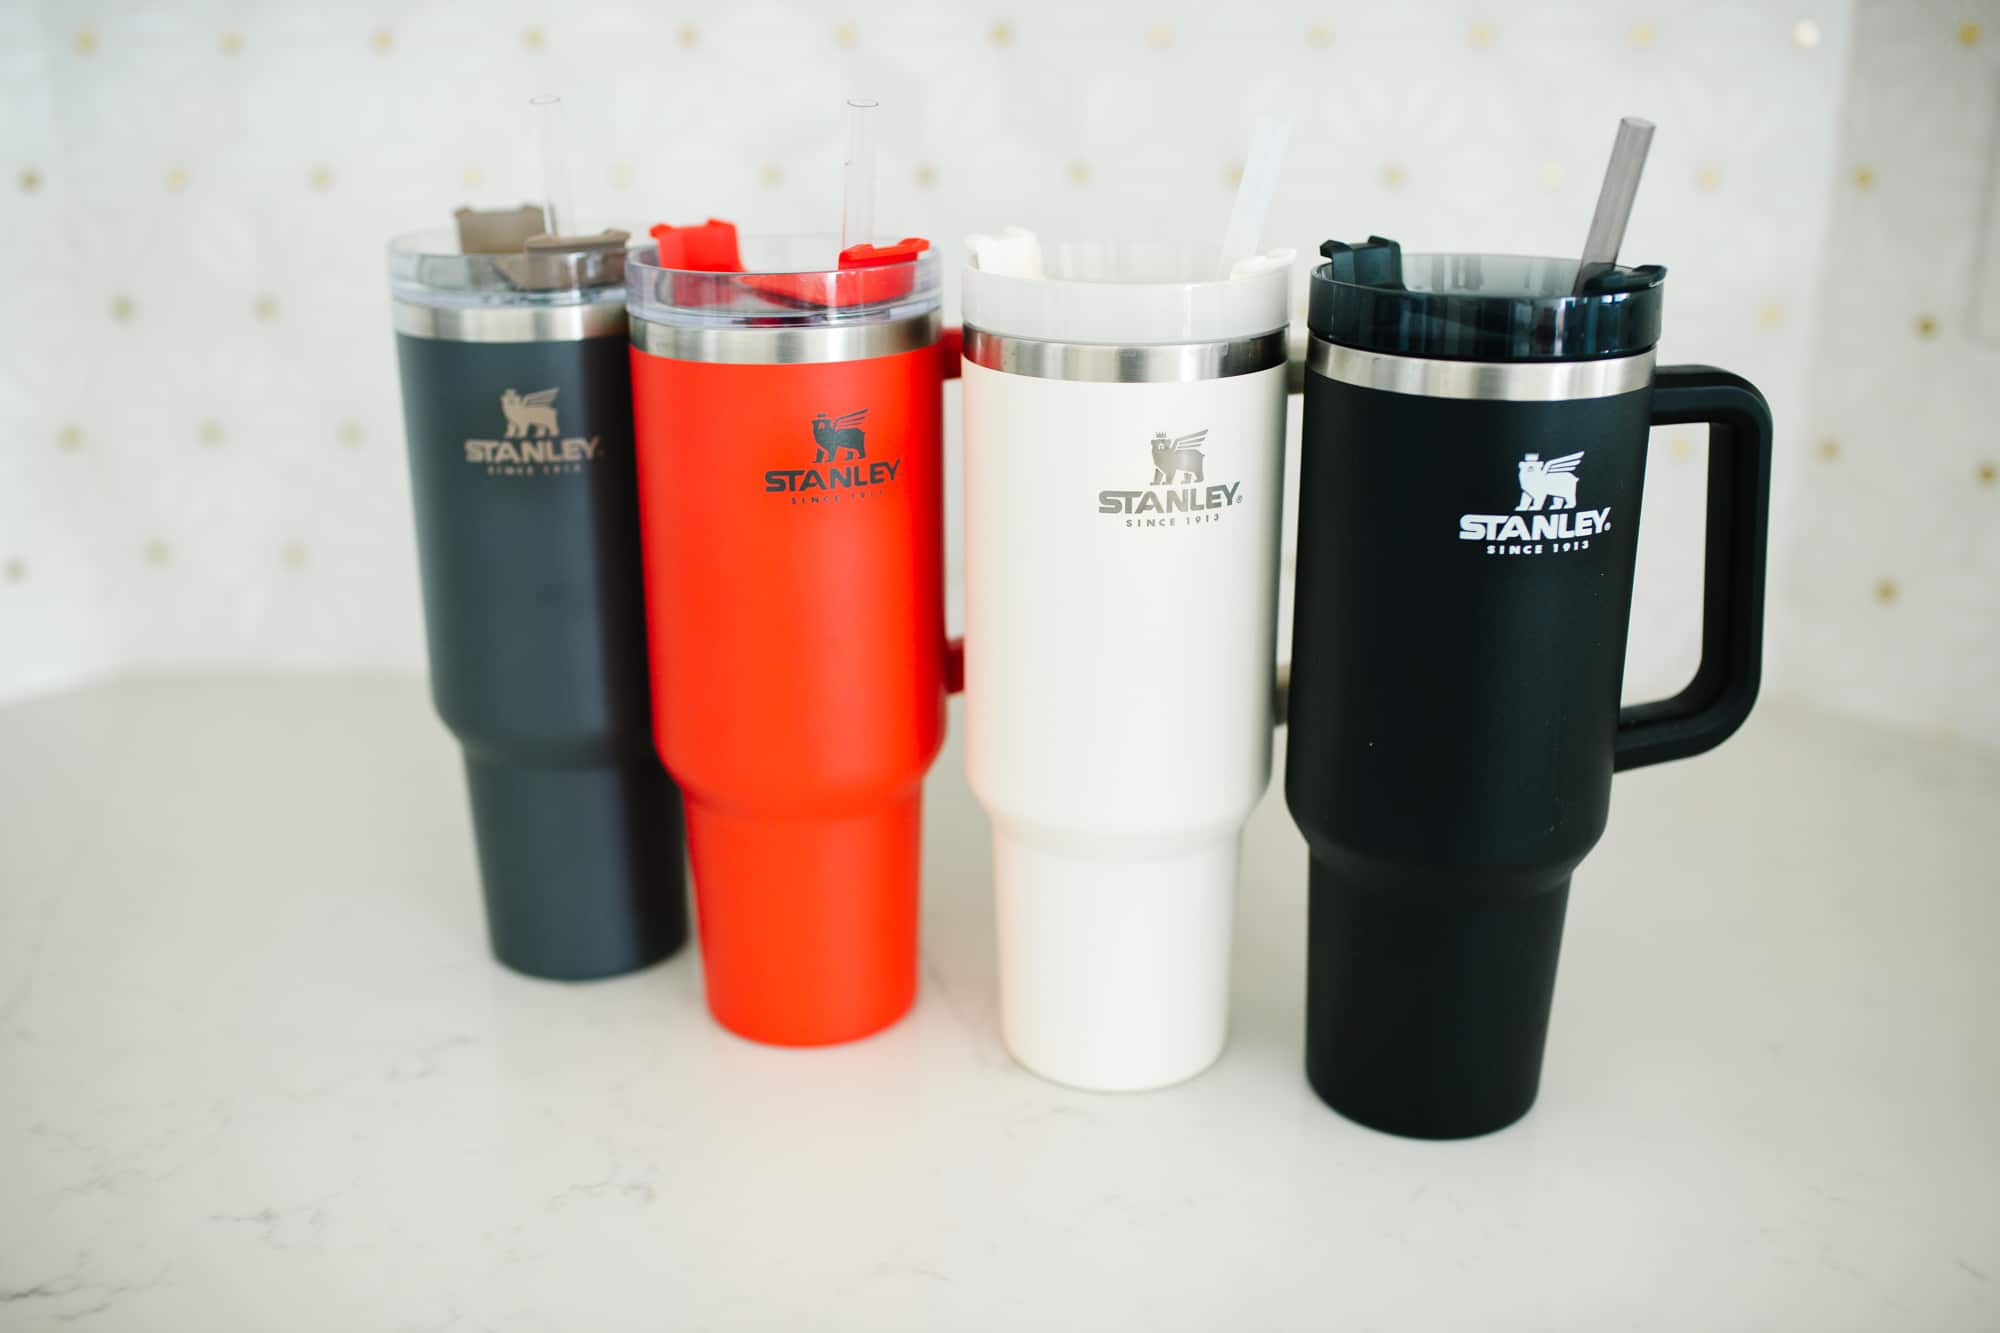 Stanley Tumbler With Handle color options shown in a row. 